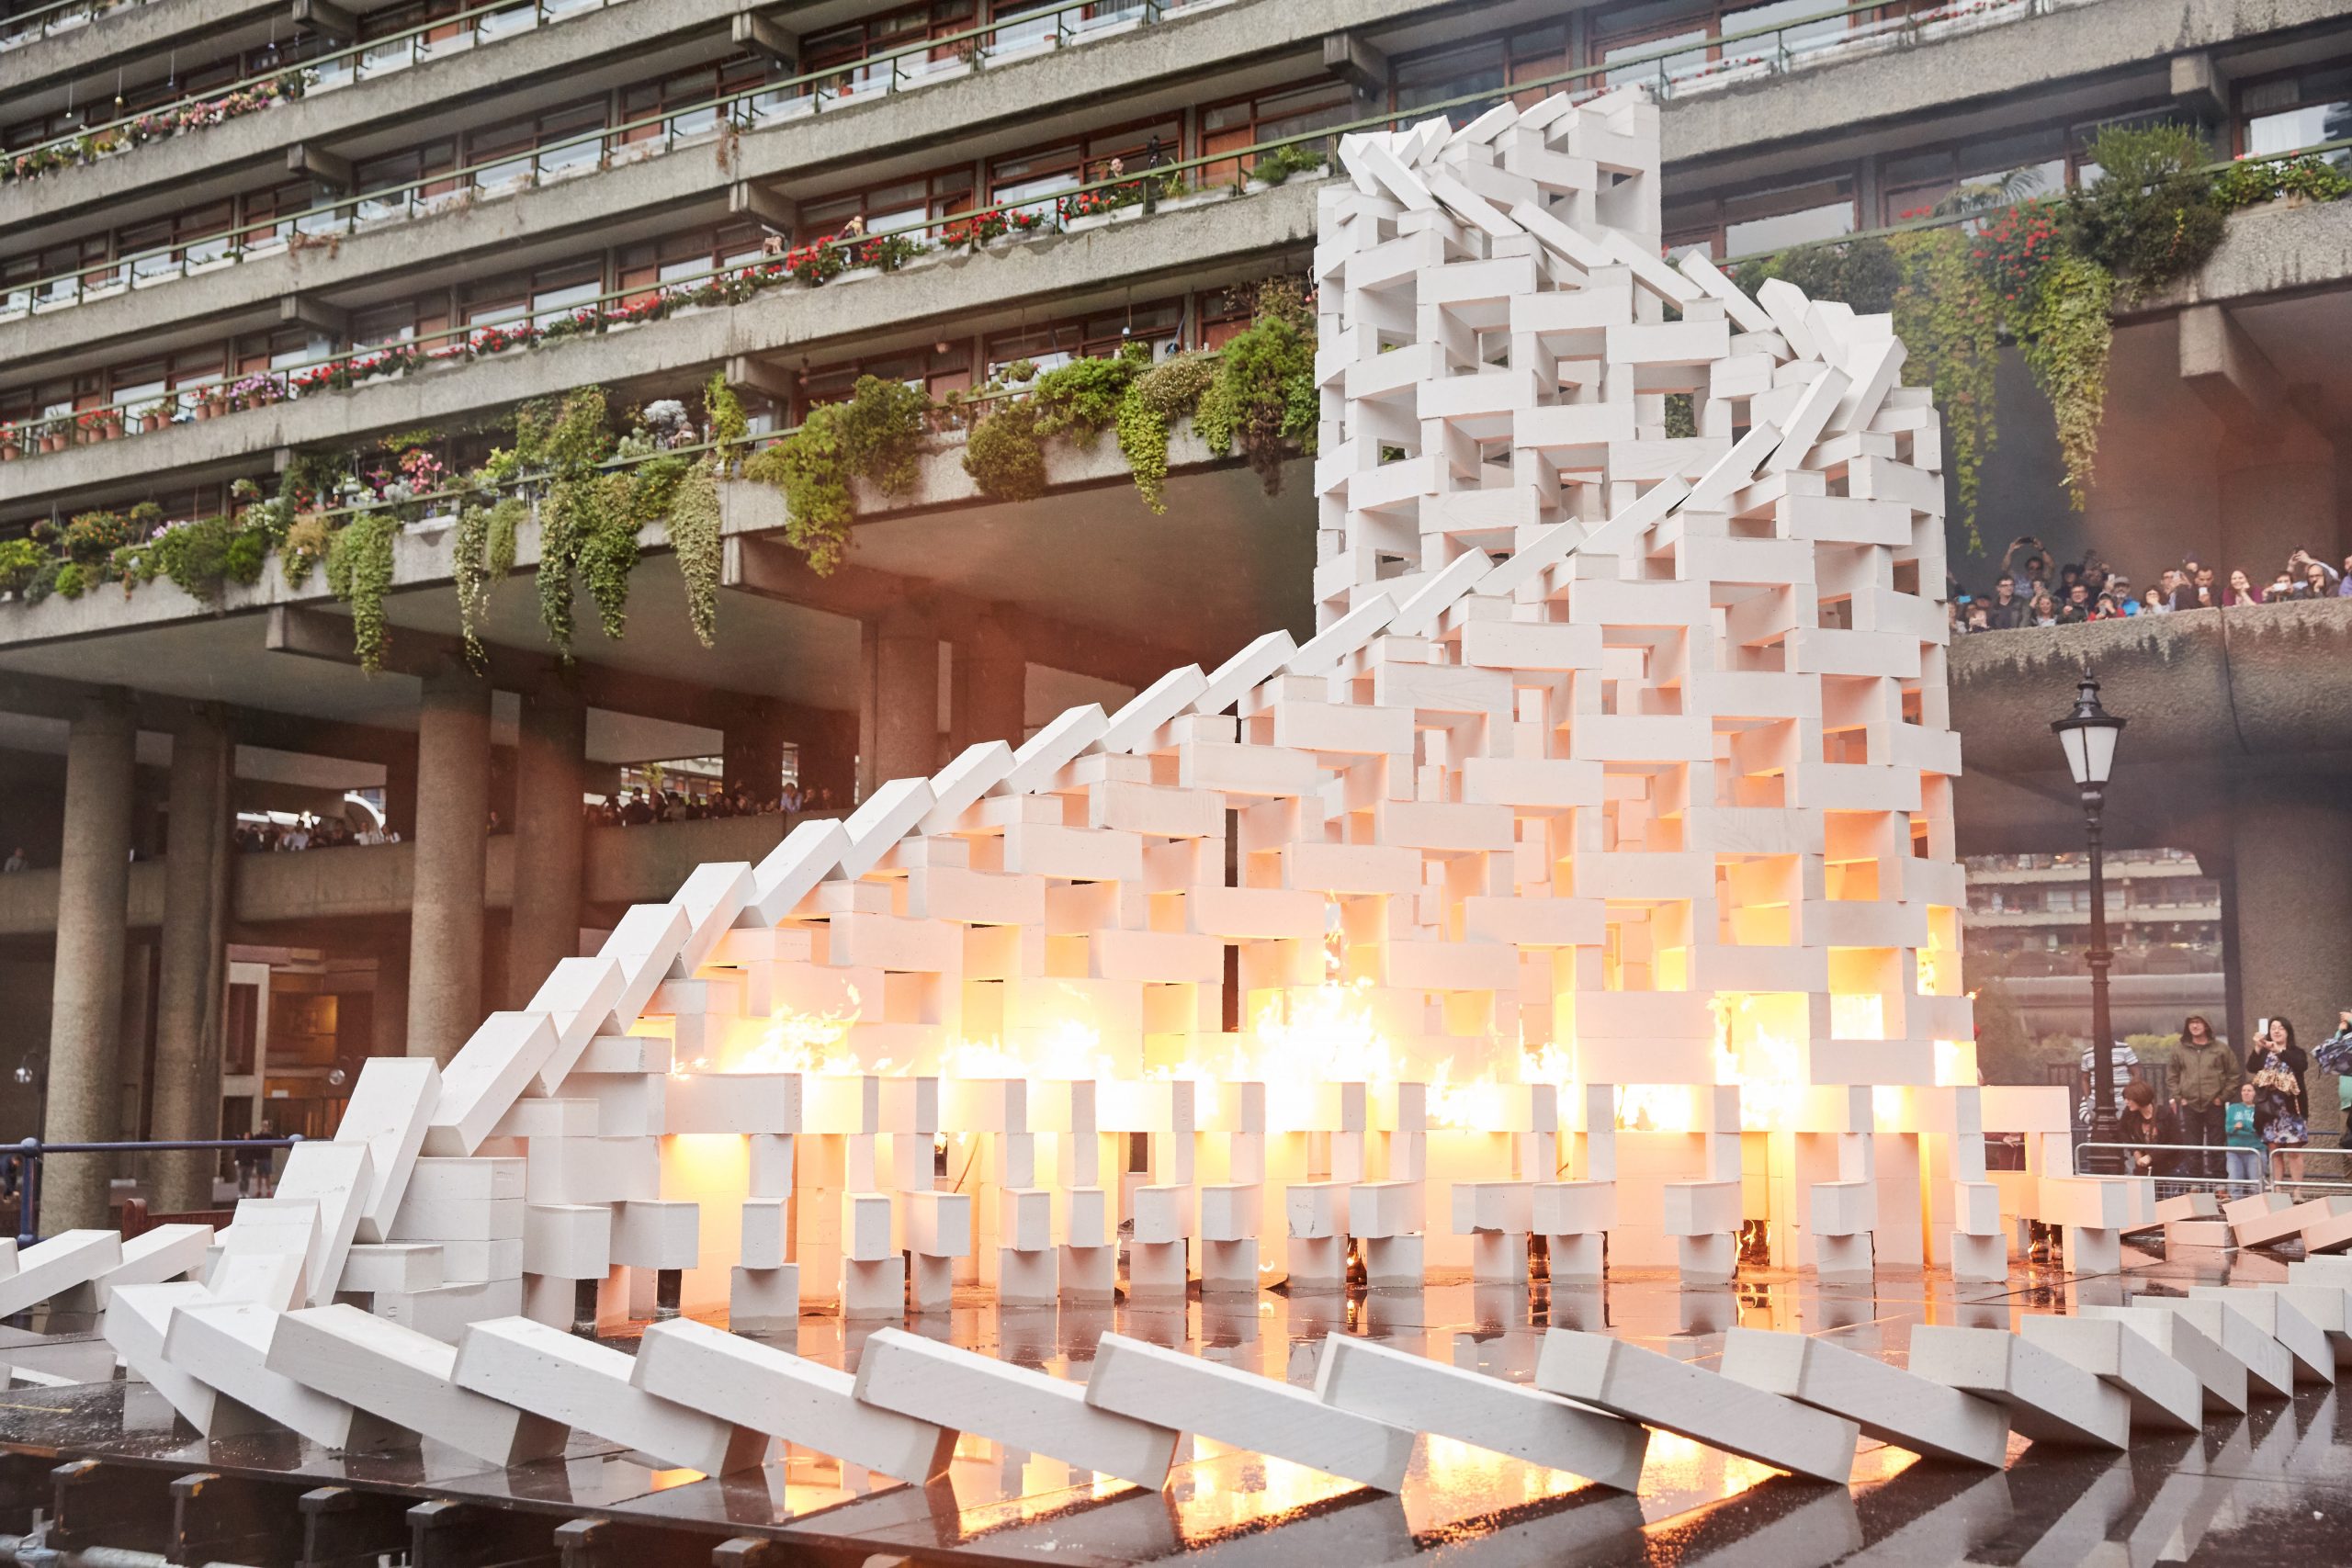 Breezeblocks built into a structure outside of the Barbican